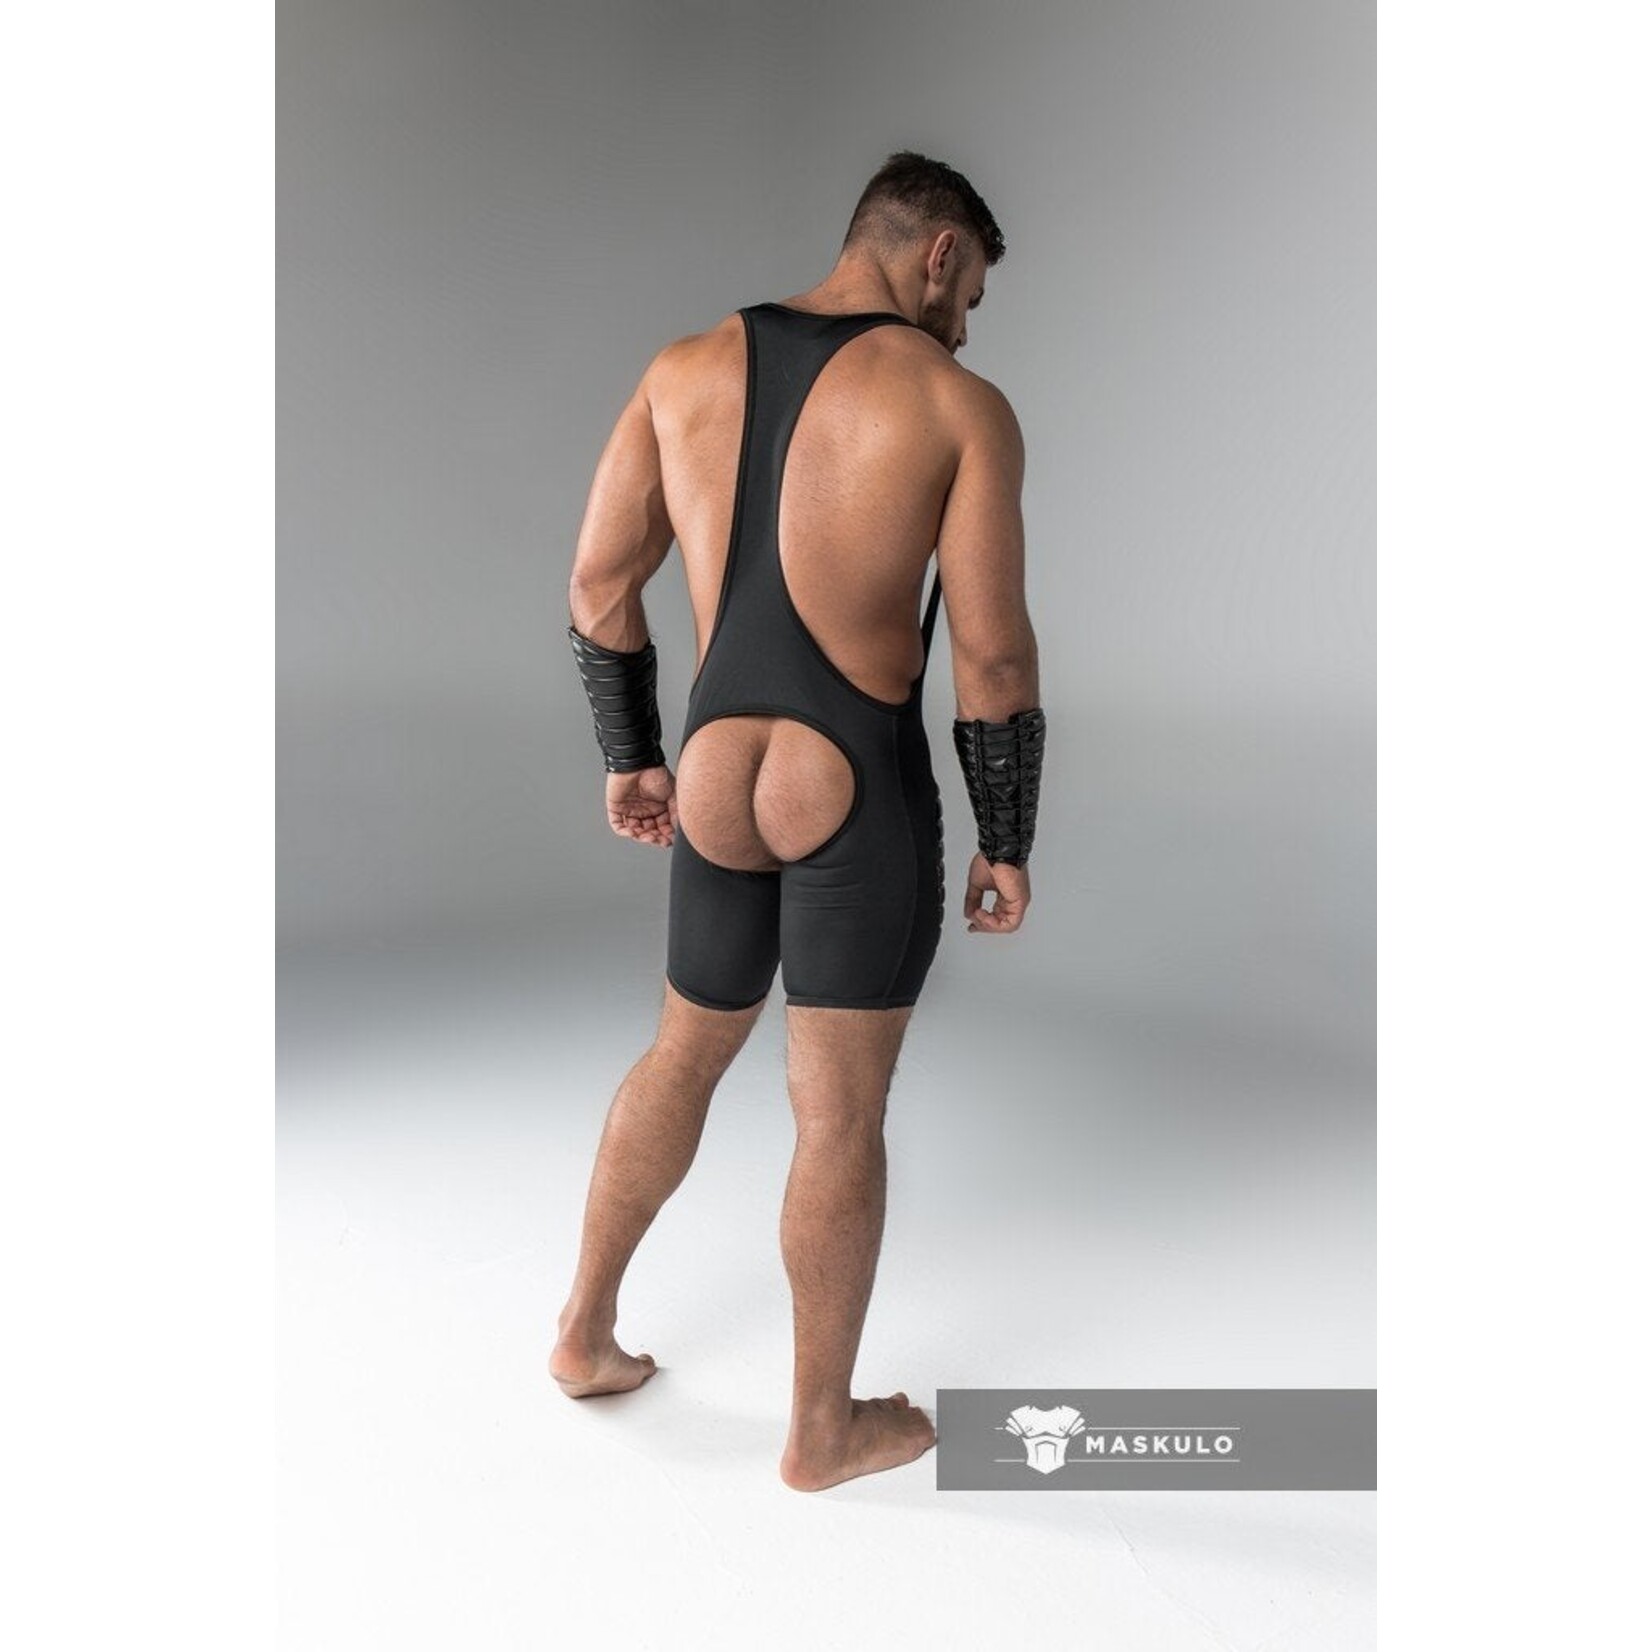 Maskulo/Outtox Maskulo Armored Wrestling Singlet - codpiece